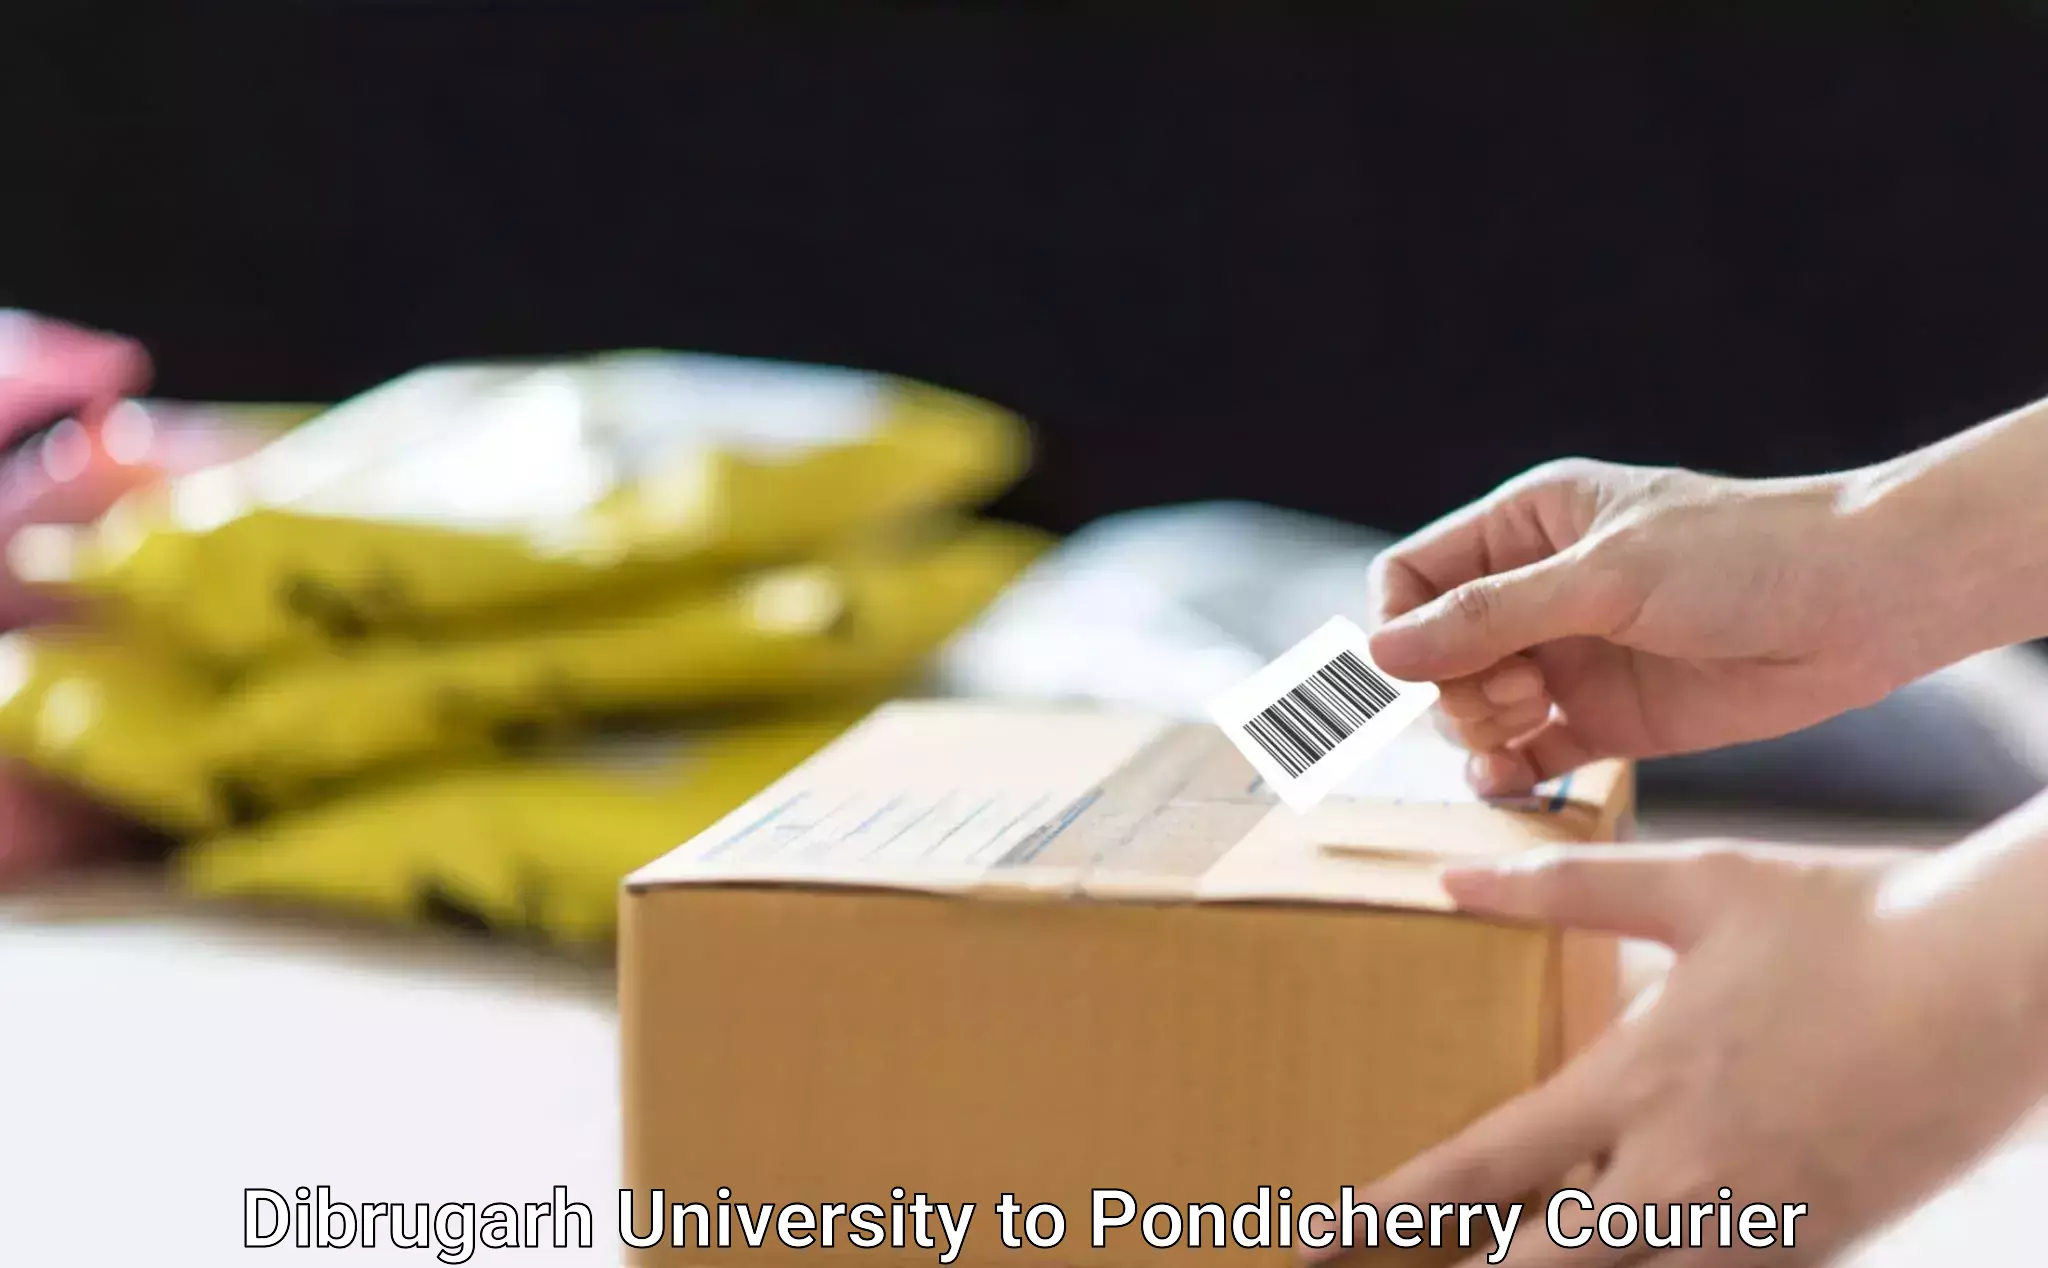 Holiday shipping services Dibrugarh University to Pondicherry